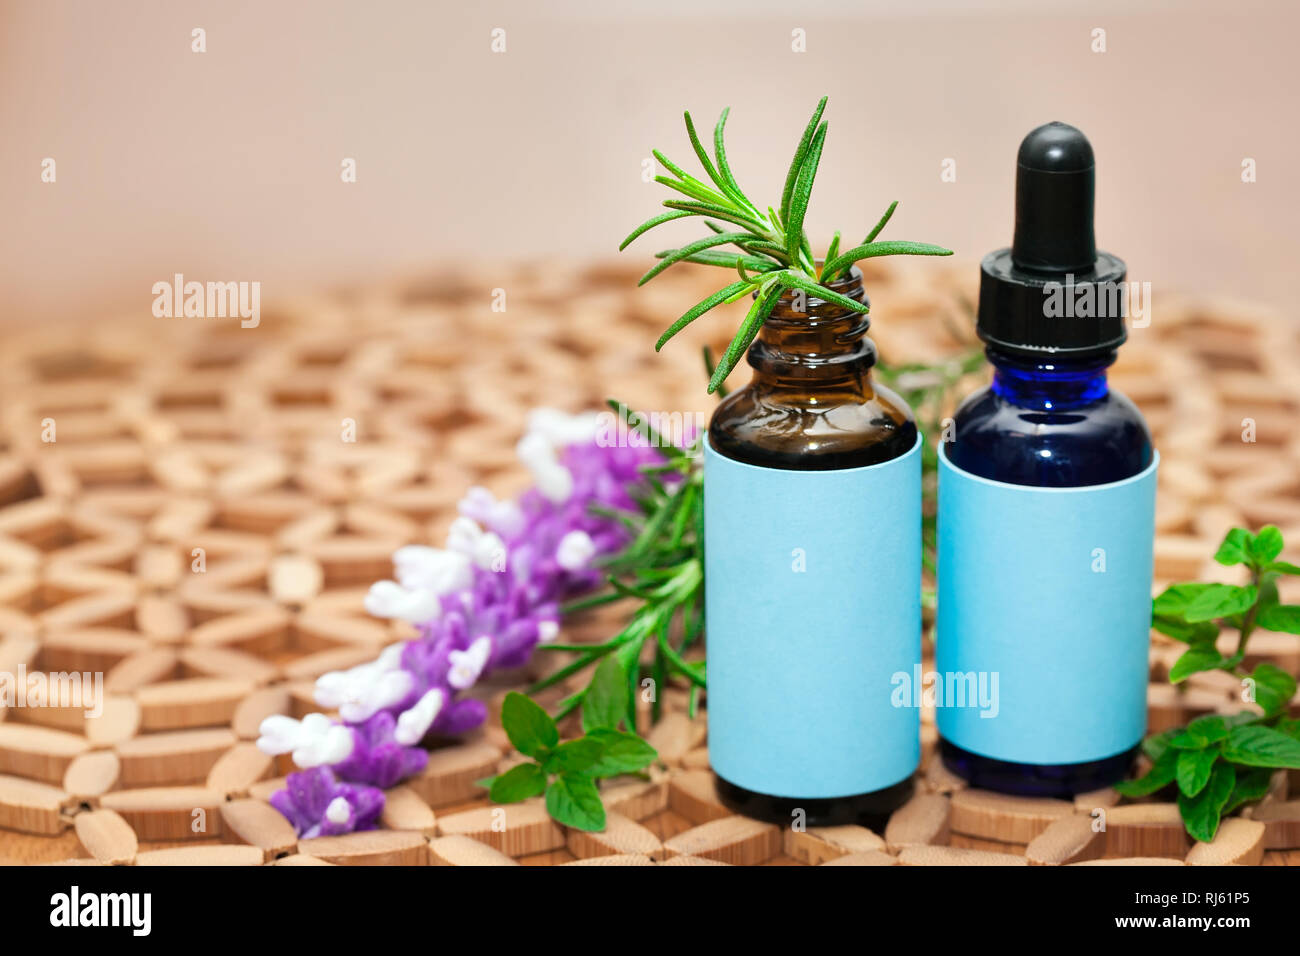 Naturopathic medicine showing a holistic approach using natural plants and herbs in glass bottles. Stock Photo